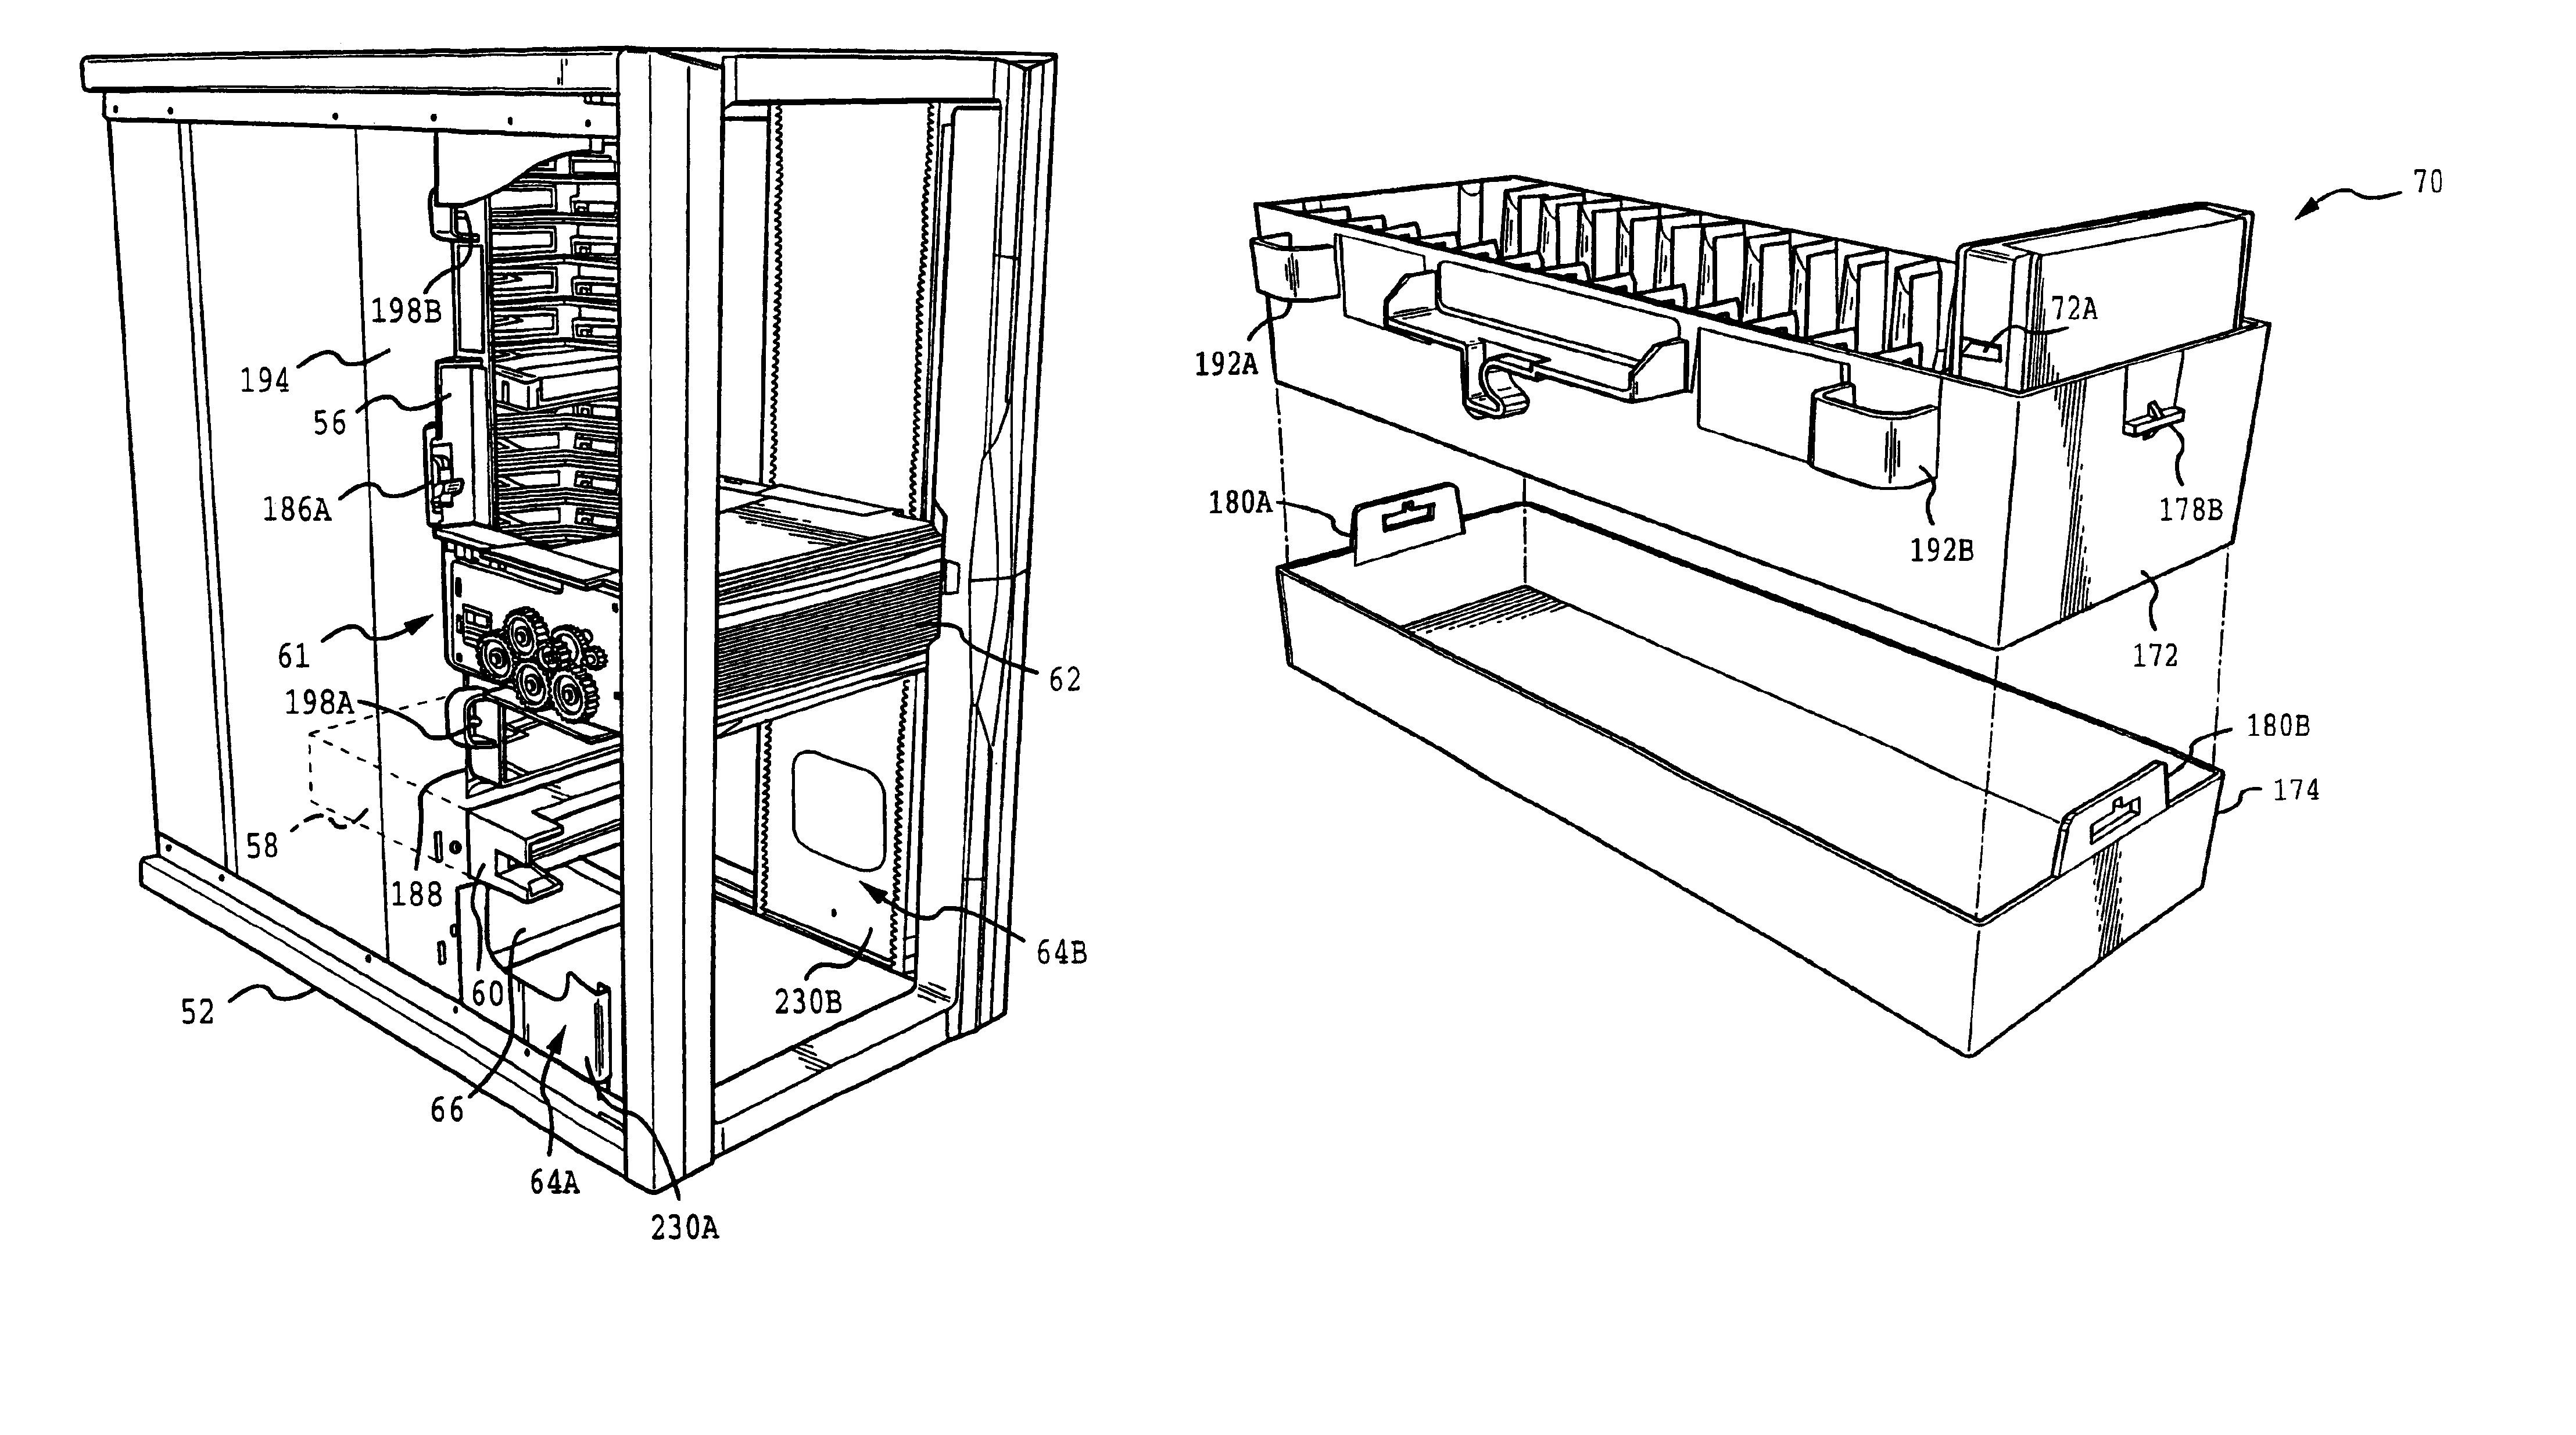 Data cartridge holder operable with a data cartridge library system